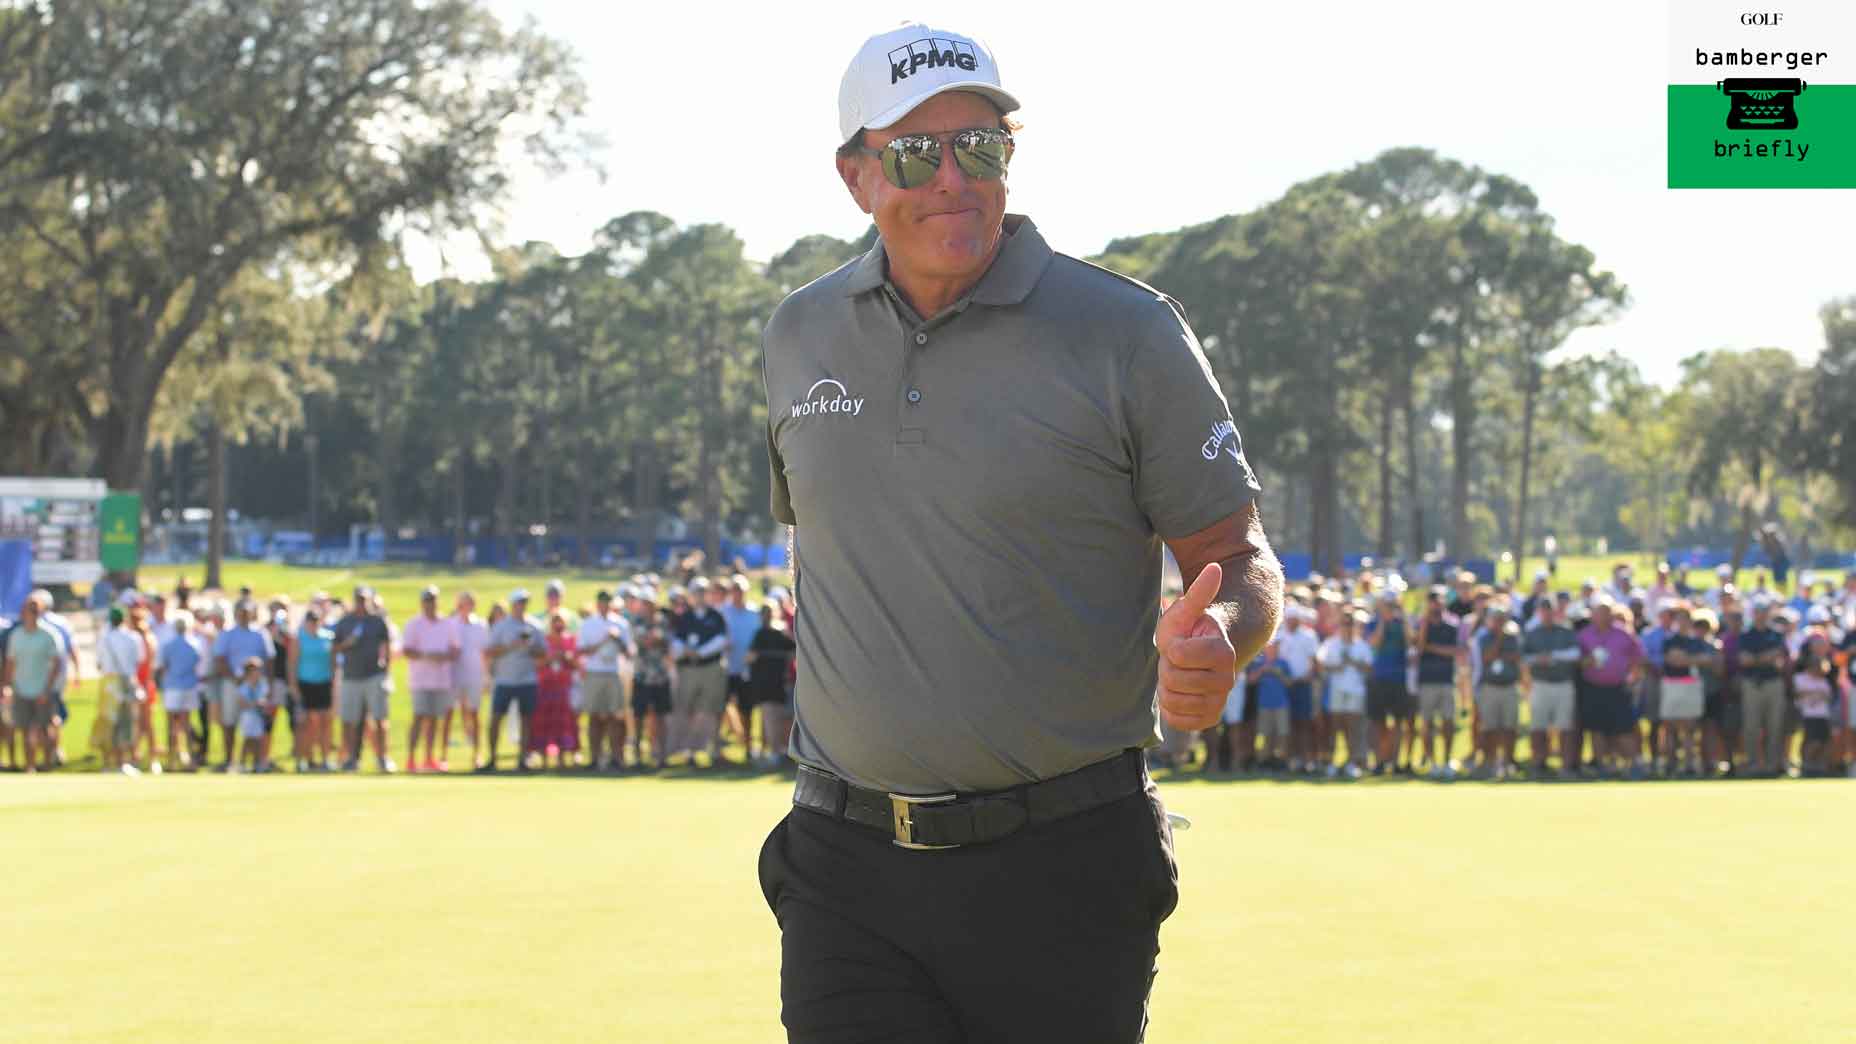 Phil Mickelson shows a thumbs up after winning the Champions Tour